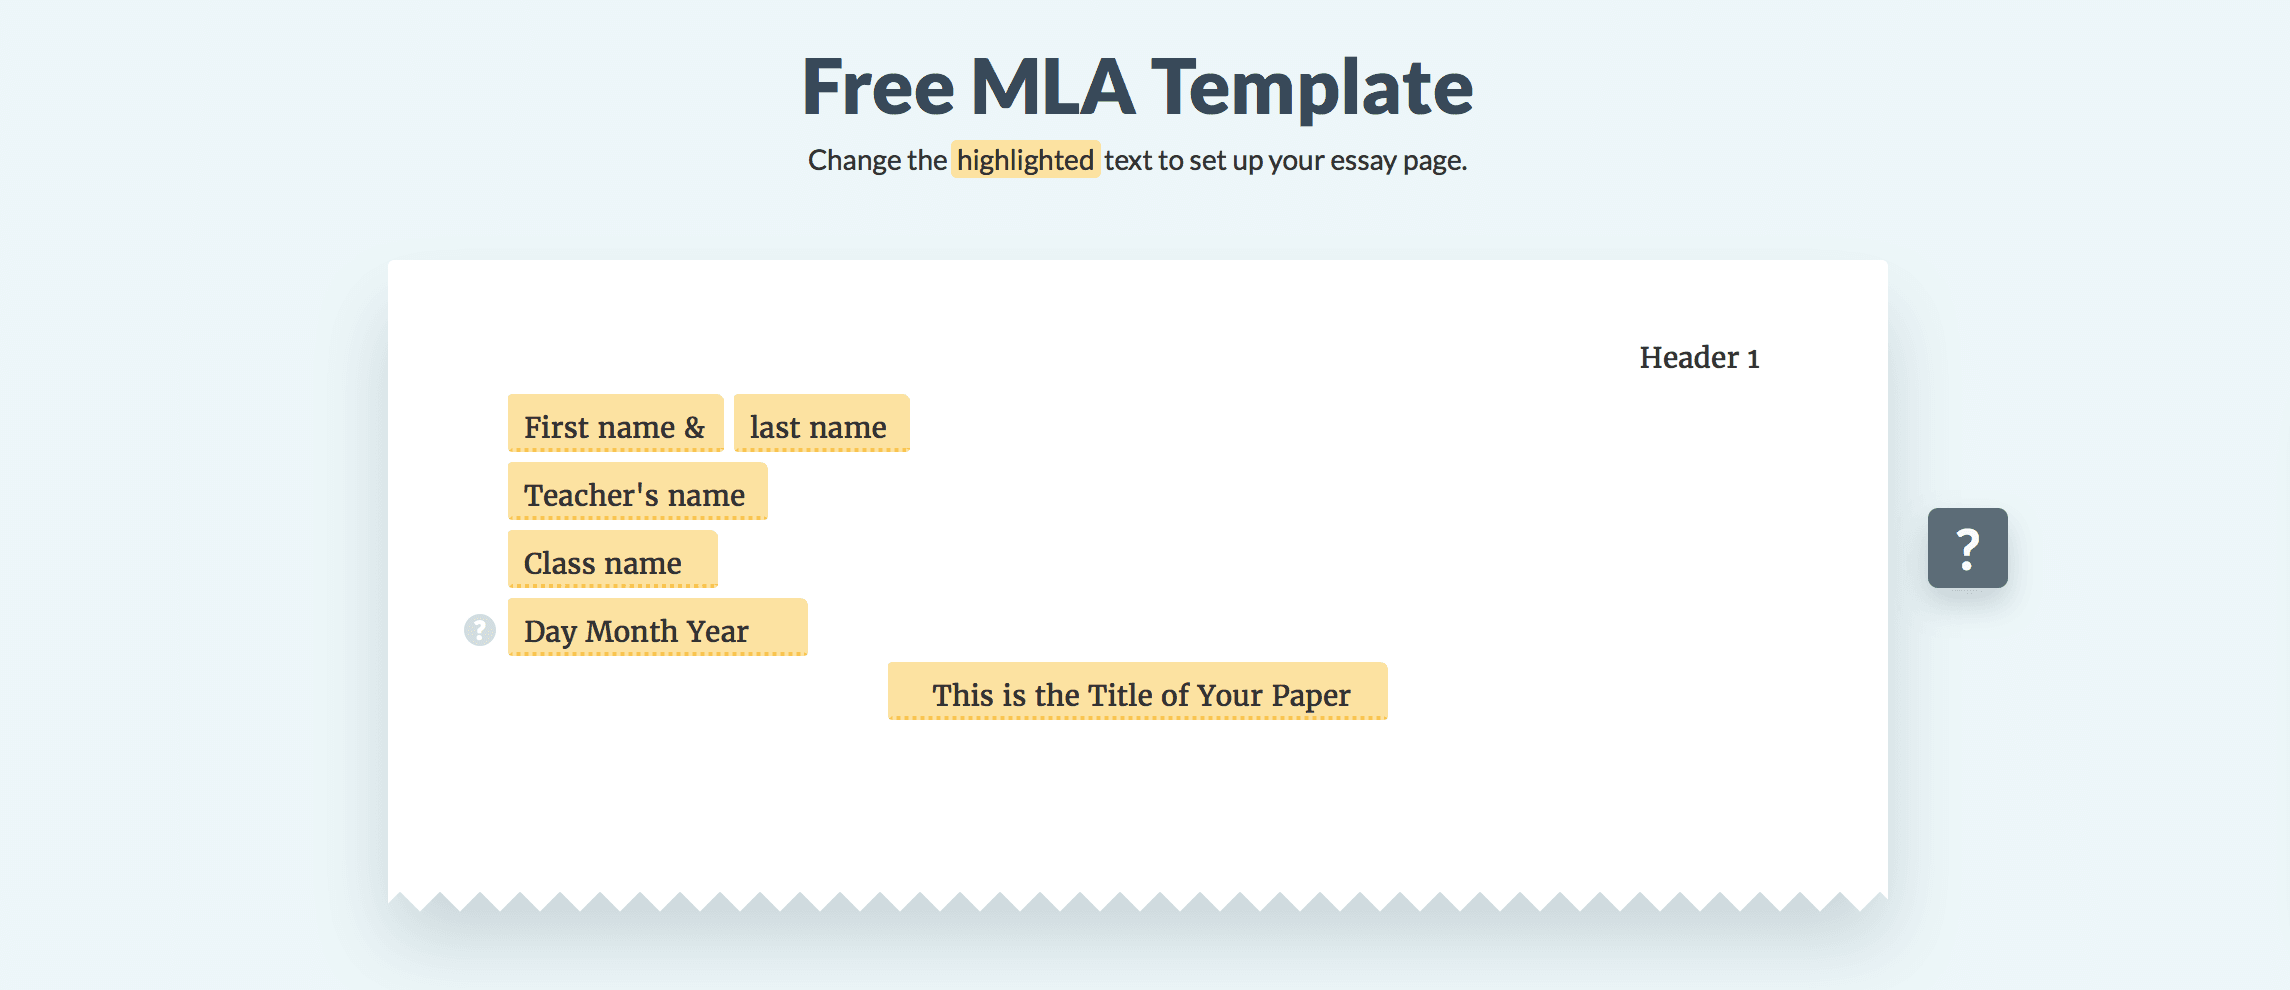 MLA Headings in Formatically